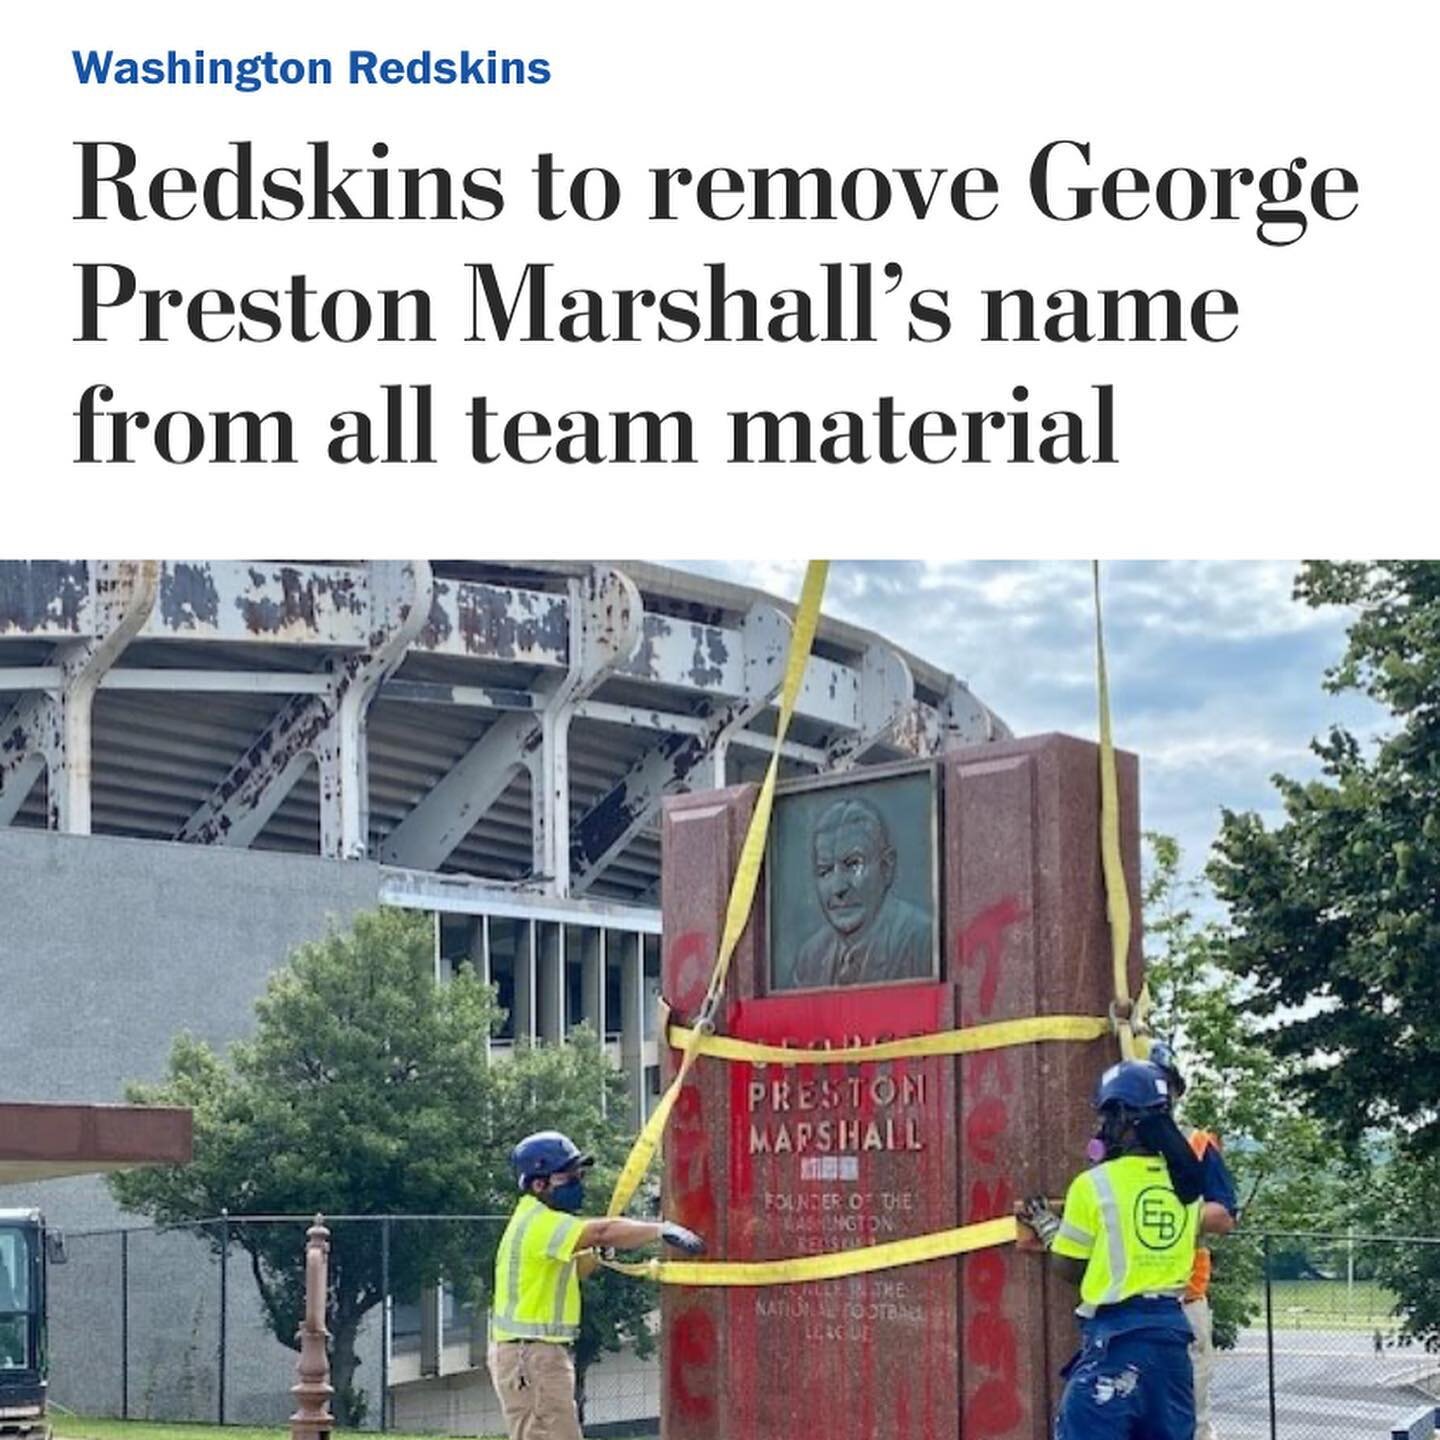 Check out our story today to read about George Preston Marshall, owner and originator of what is now finally NOT called the Redskins Football Team. George Marshall may have been a smart business man, but he was also an immense bigot, racist and abuse